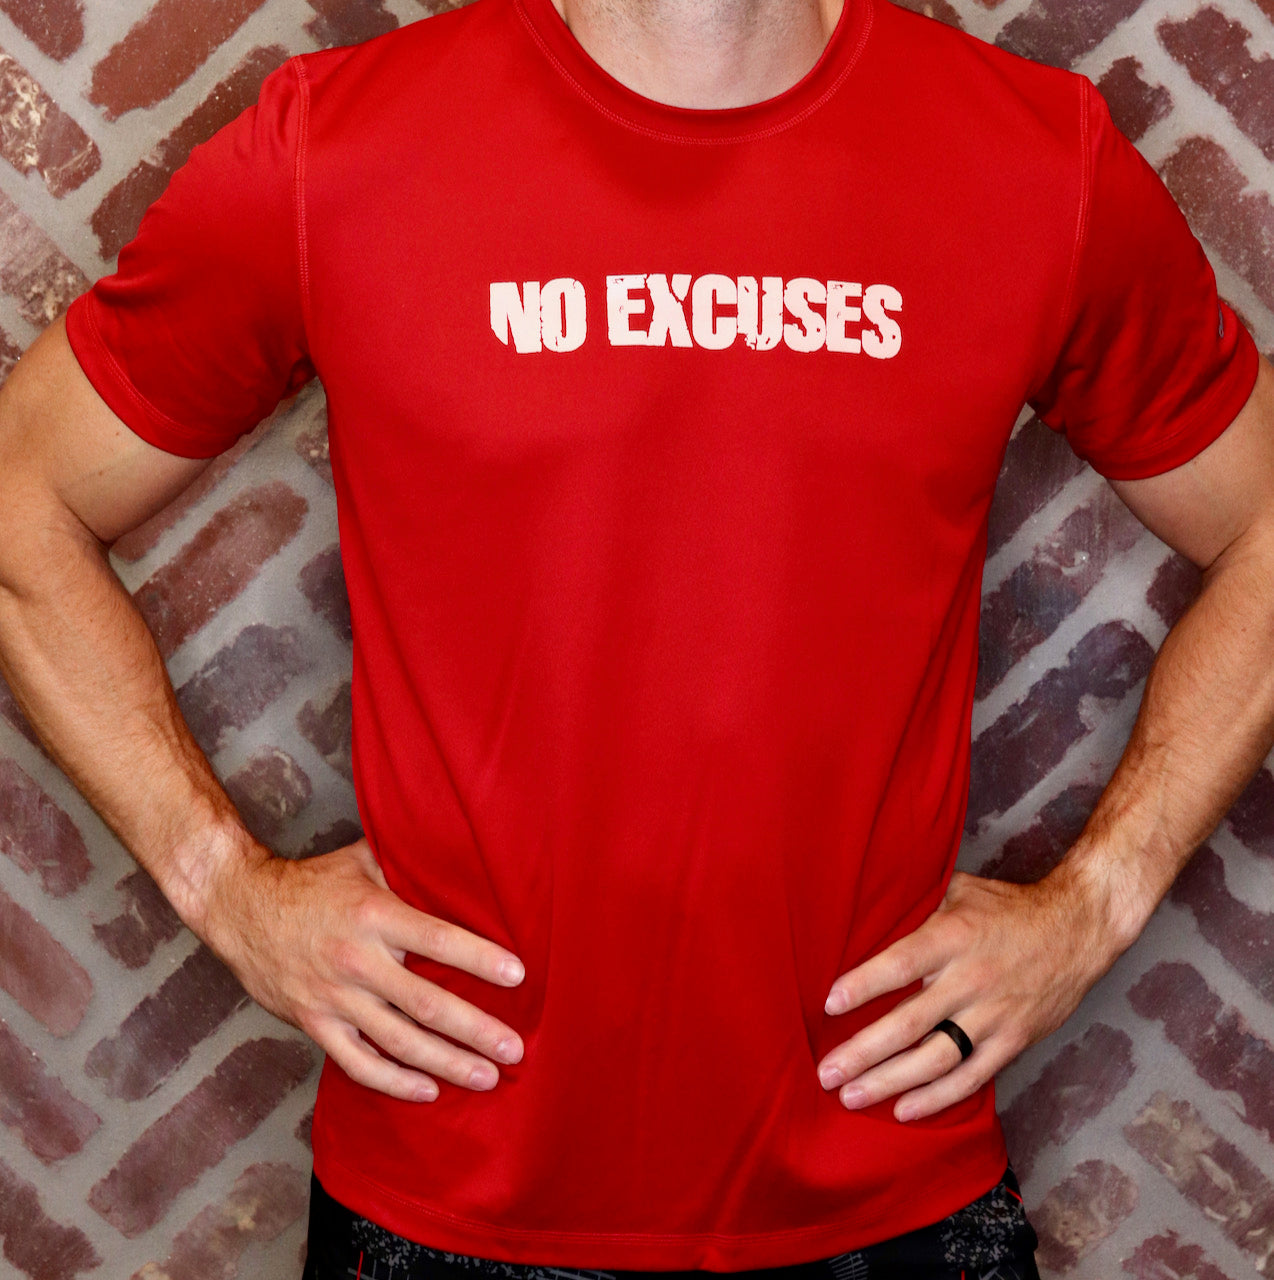 MK Supplements NO EXCUSES T-Shirt in Red.